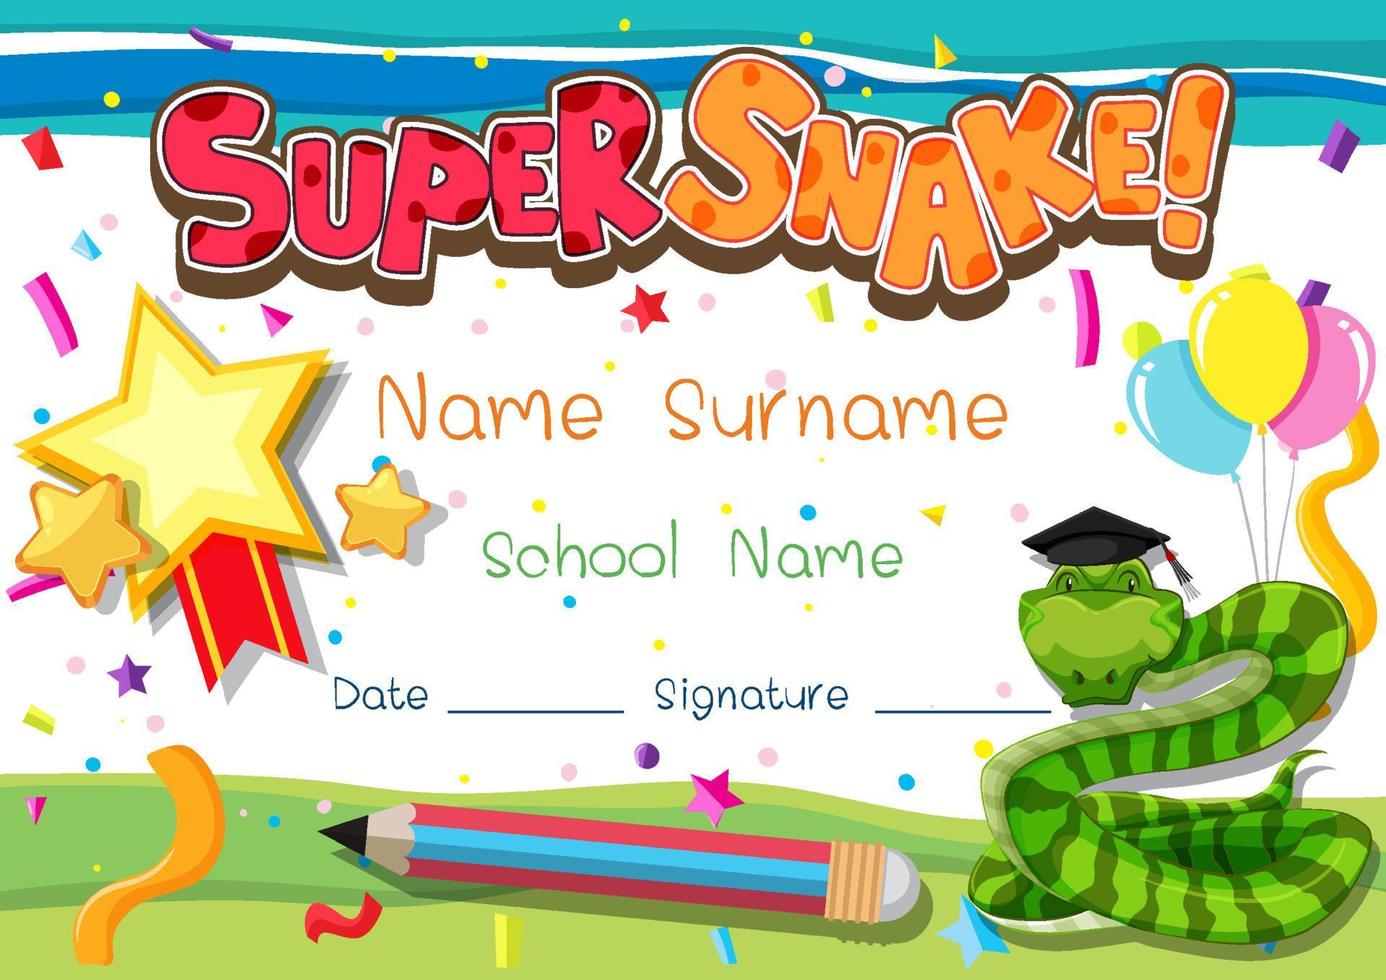 Diploma or certificate template for school kids with super snake vector